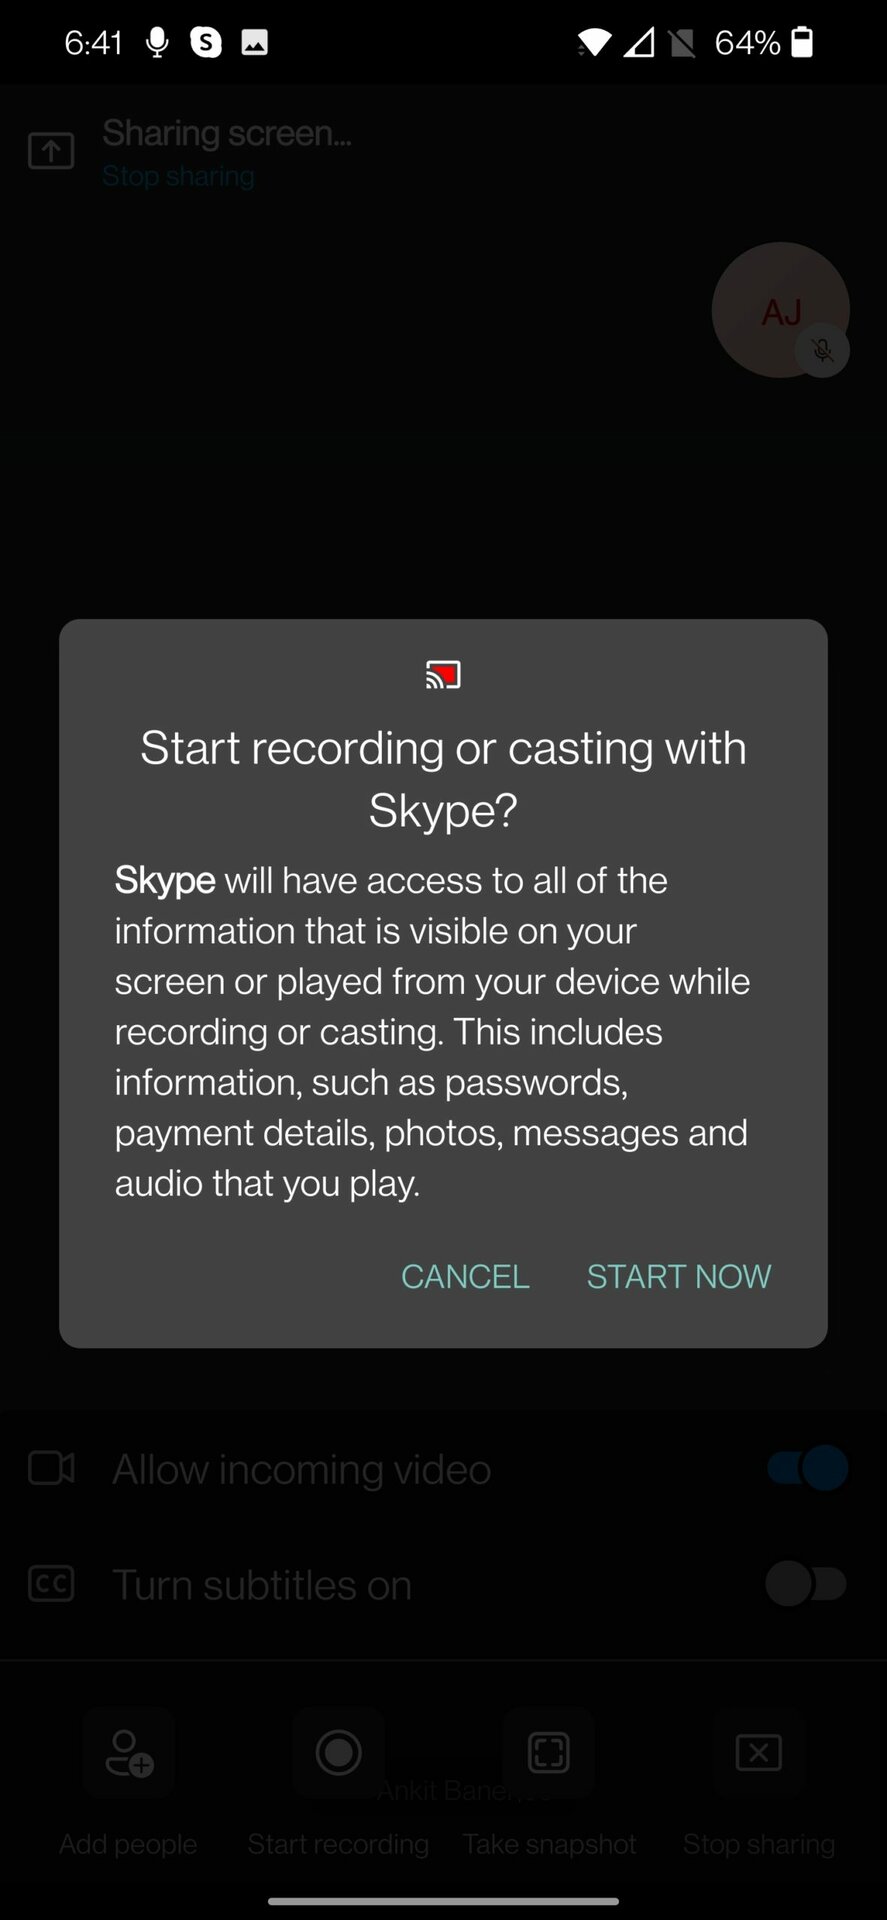 skype permission required to share screen from mobile